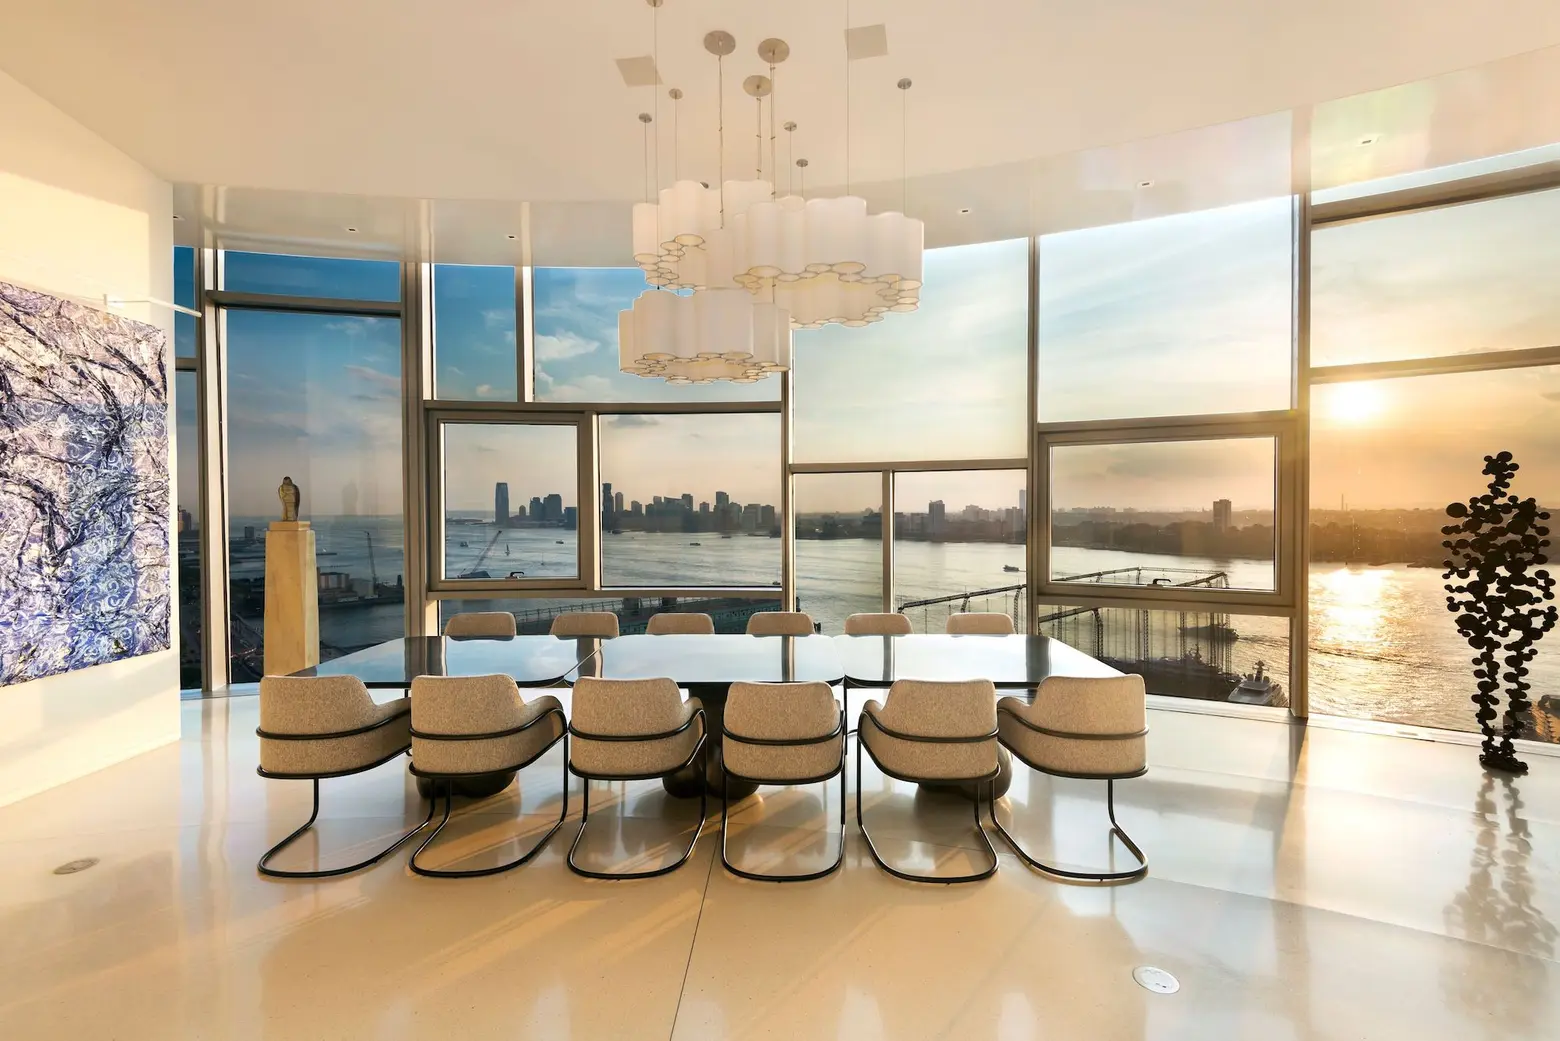 Hugh Jackman buys penthouse at Jean Nouvel’s Chelsea condo for $21M